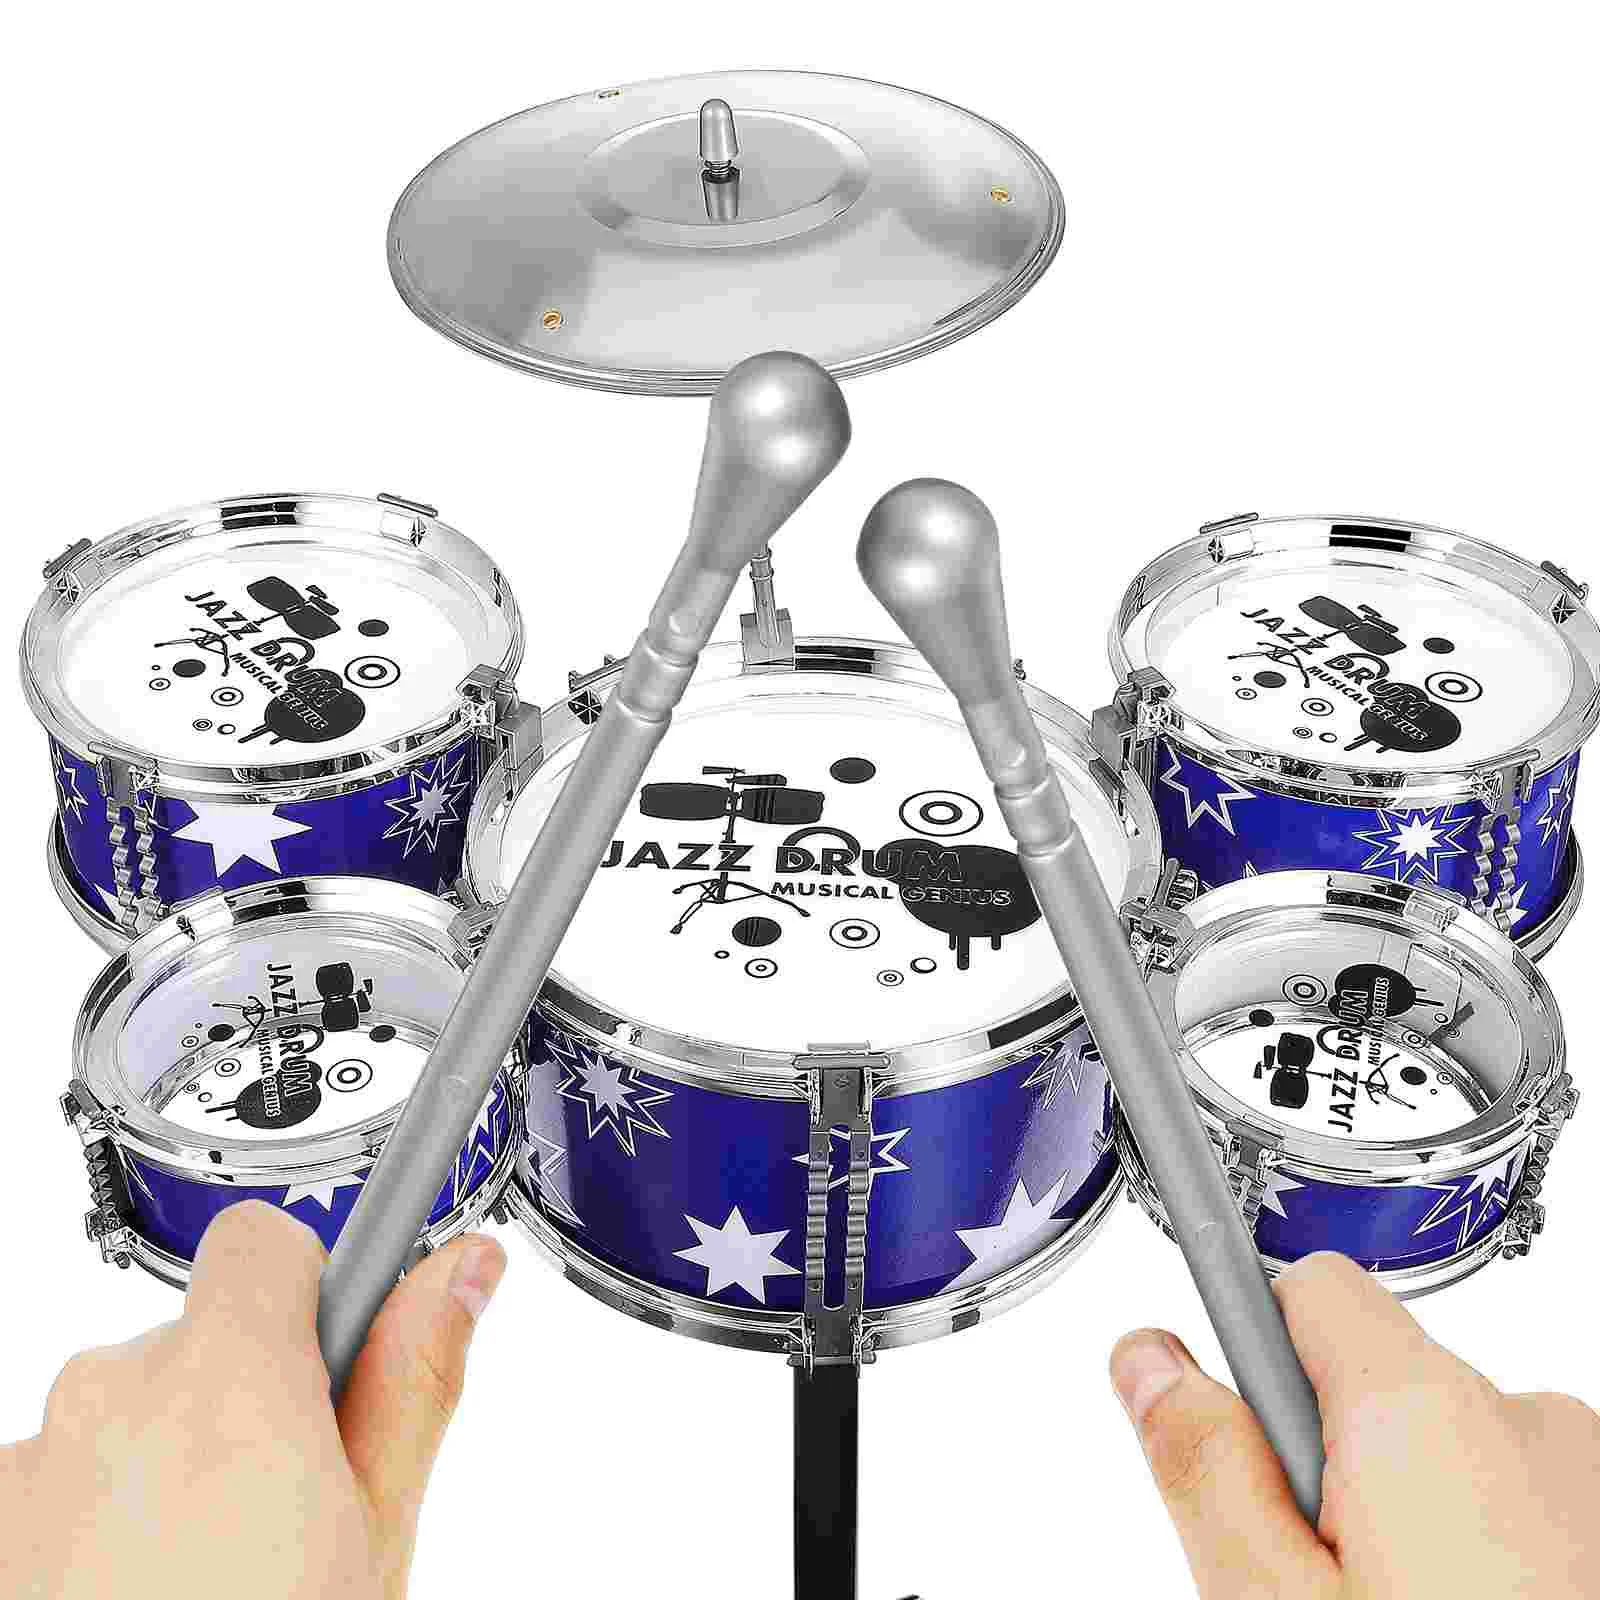 

Kids Drum Set Kids Jazz Drum Kit Toddler Toys Drums Stool Pedal Percussion Musical Instruments Drum Toy Birthday Early Education